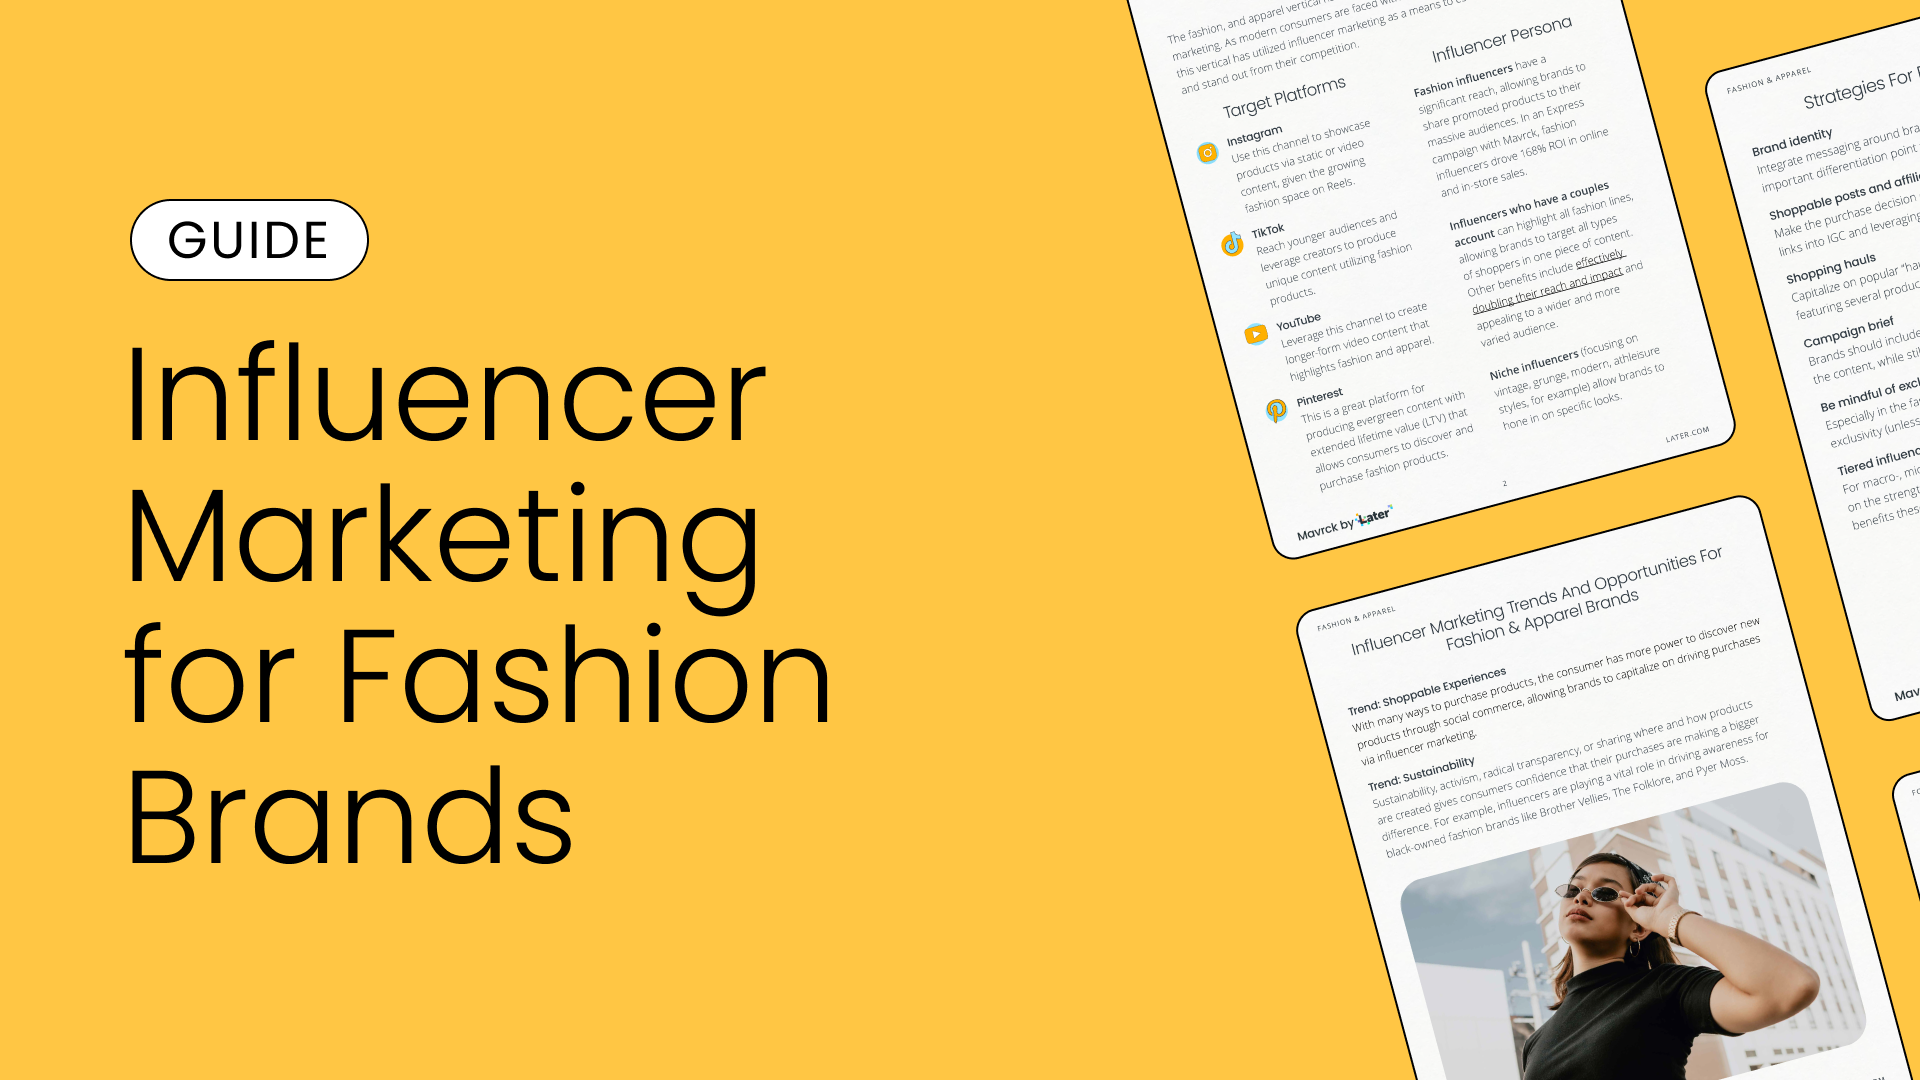 Free influencer marketing guide for fashion and apparel brands from Later